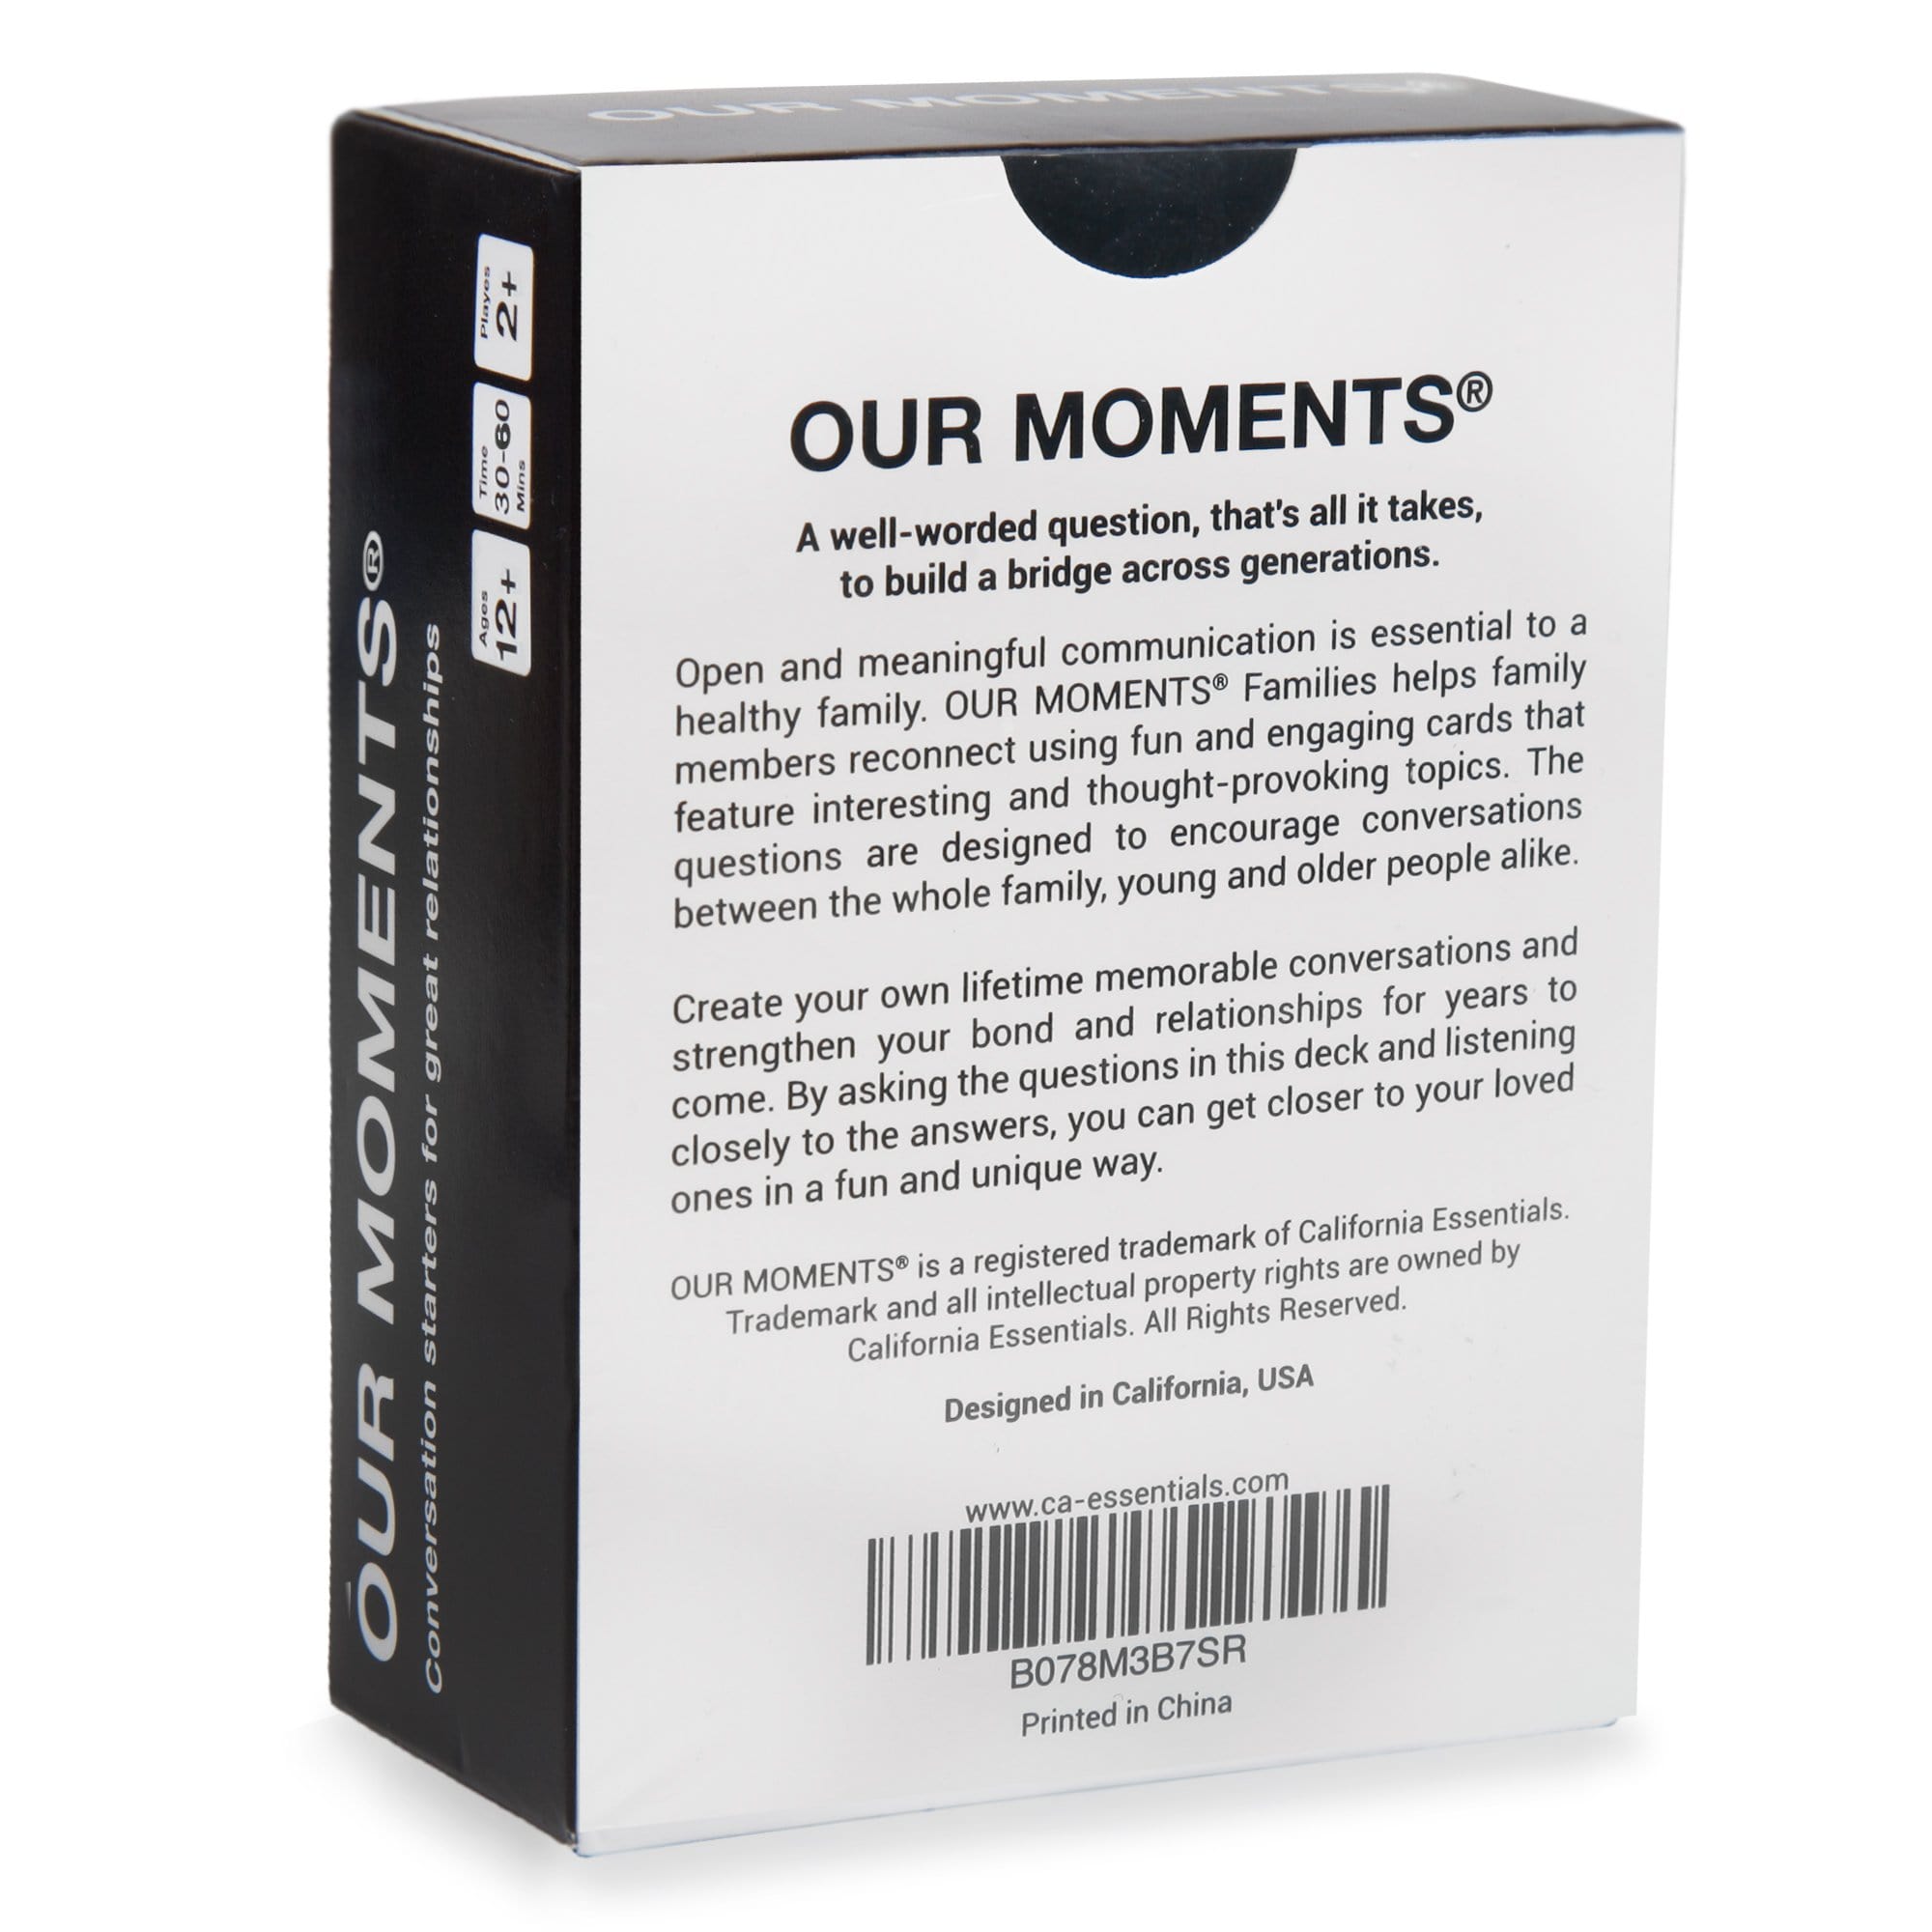 Families Edition - Our Moments - Conversation Starters For Great Relationships